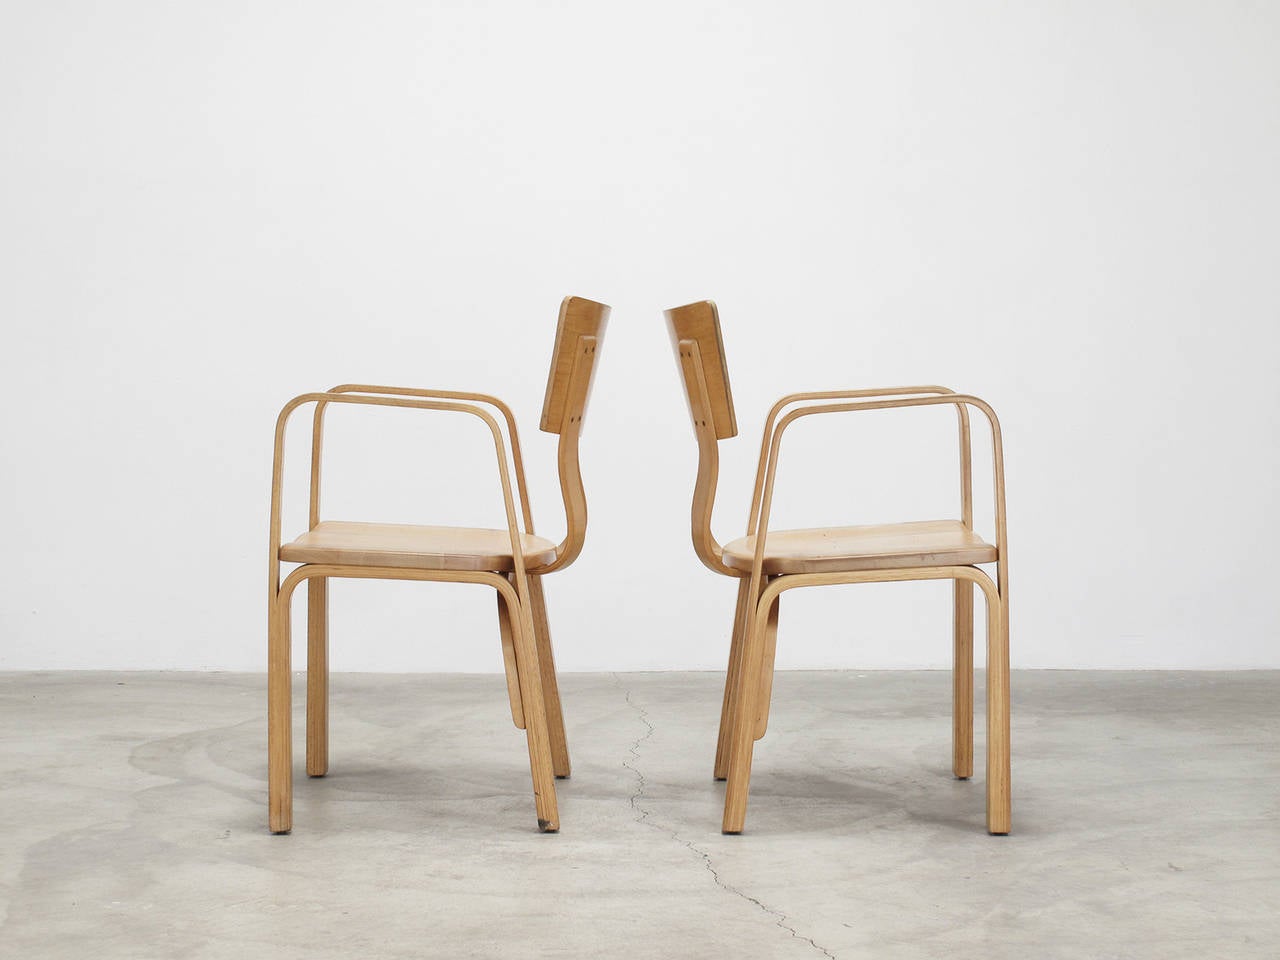 American Pair of Vintage Thonet Molded Plywood Arm Chairs, 1950s